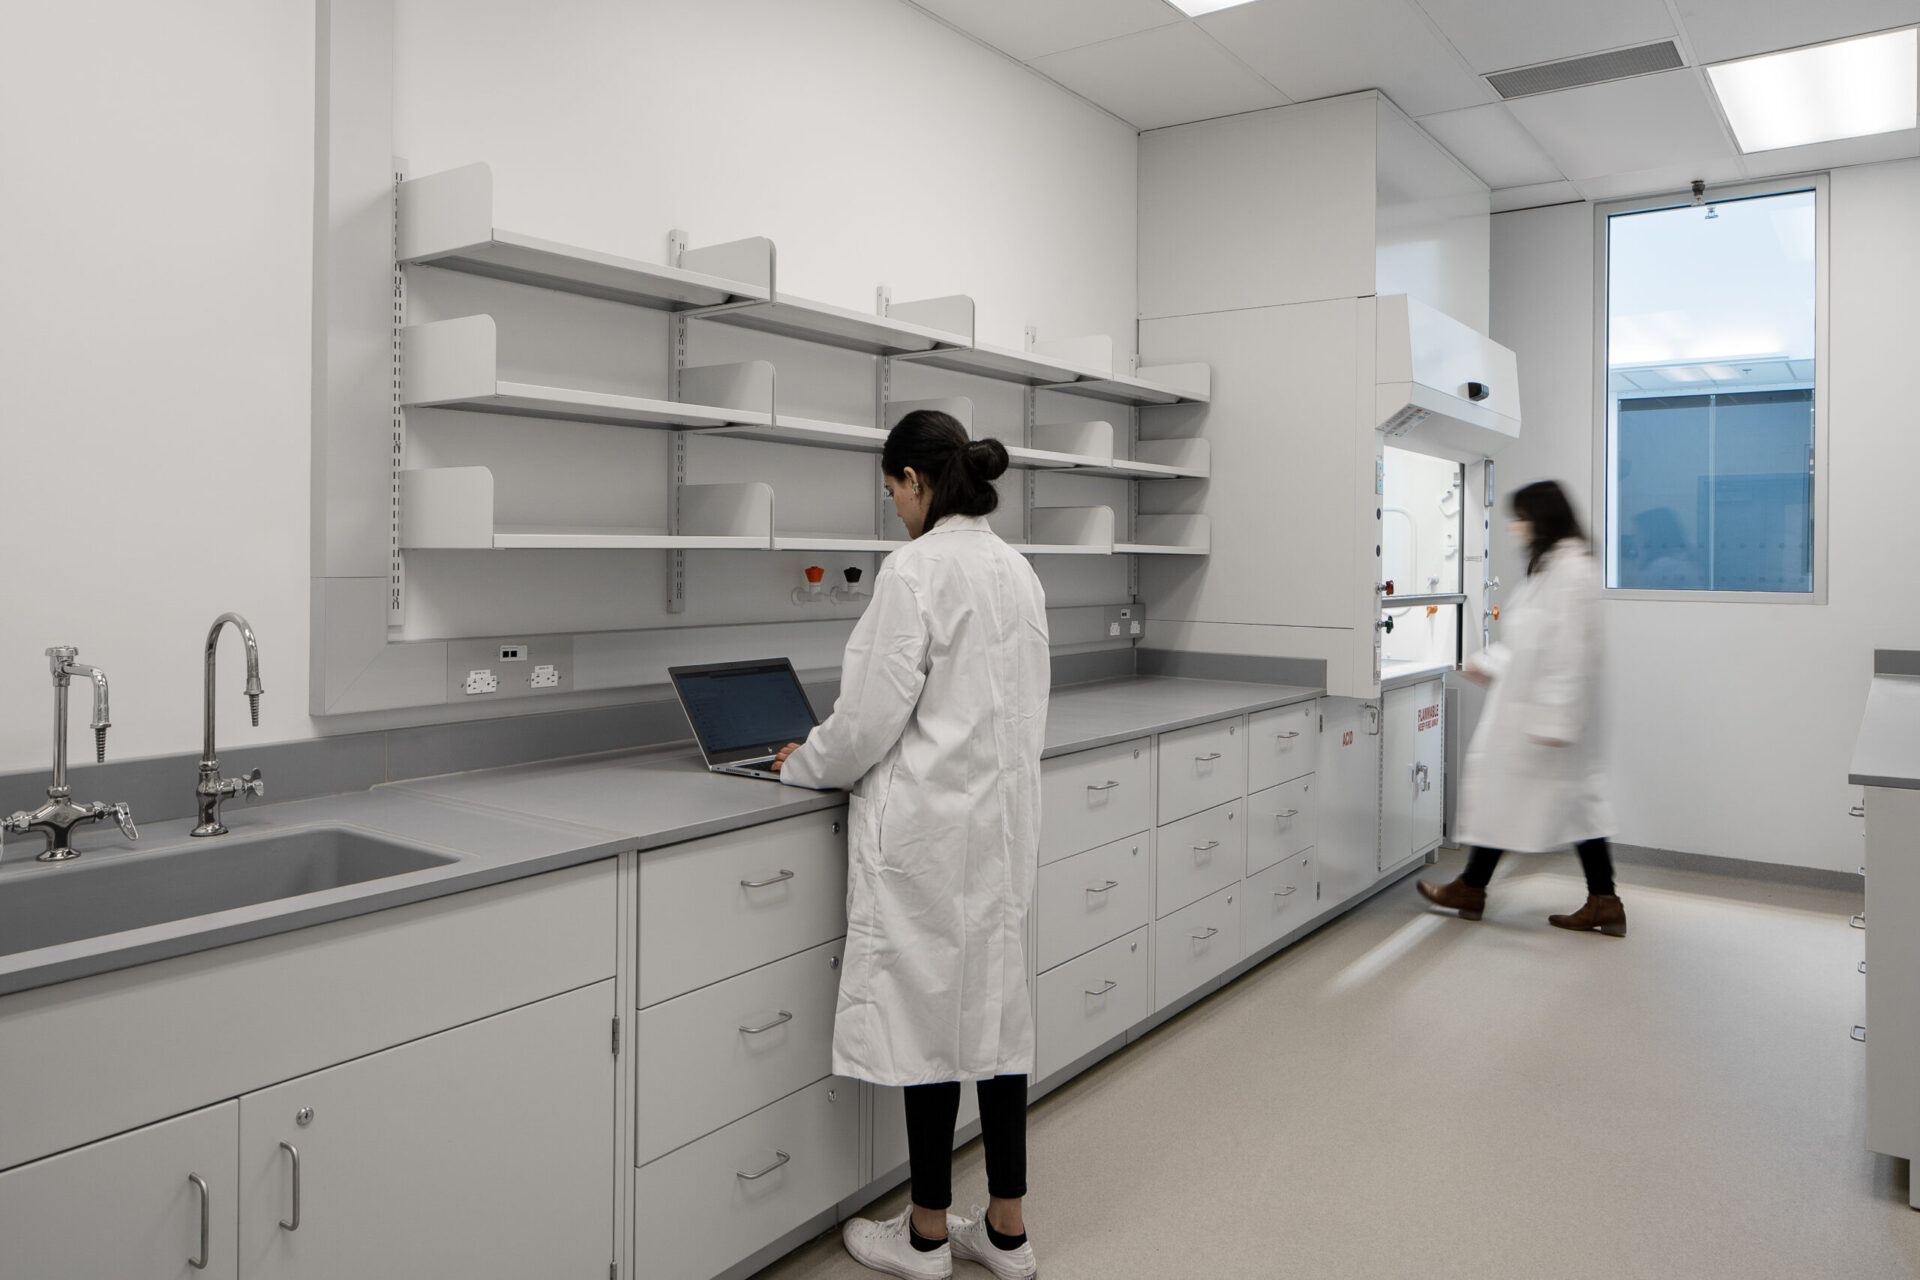 Two women in lab coats working in an architectural lab.